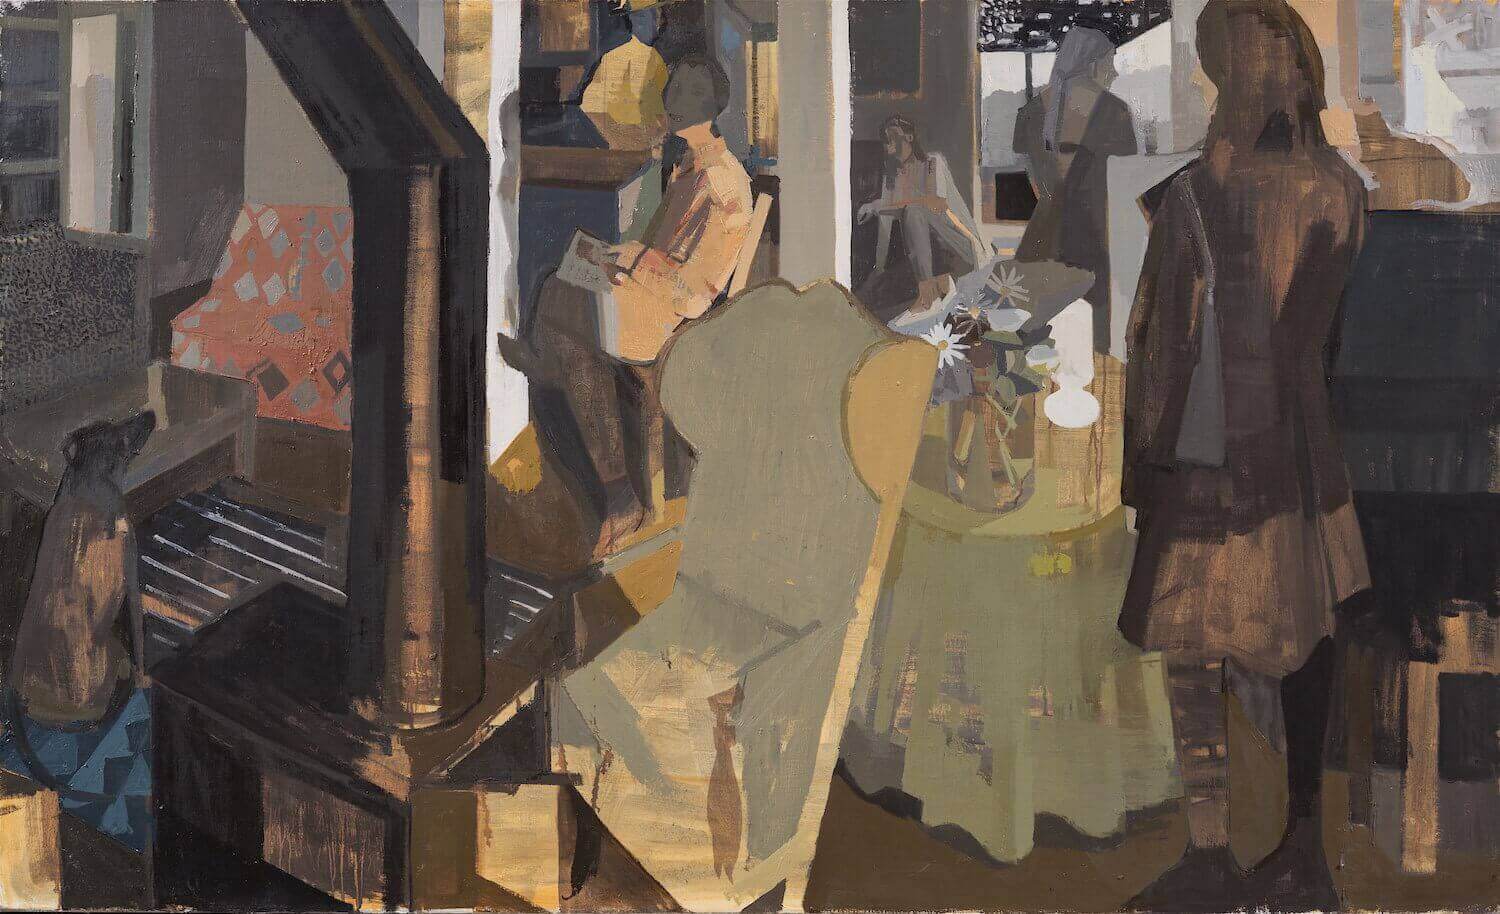 Susan Lichtman, Rosa Moves Out, 2016, oil on linen, 40 x 66 inches (courtesy of Steven Harvey Fine Art Projects)